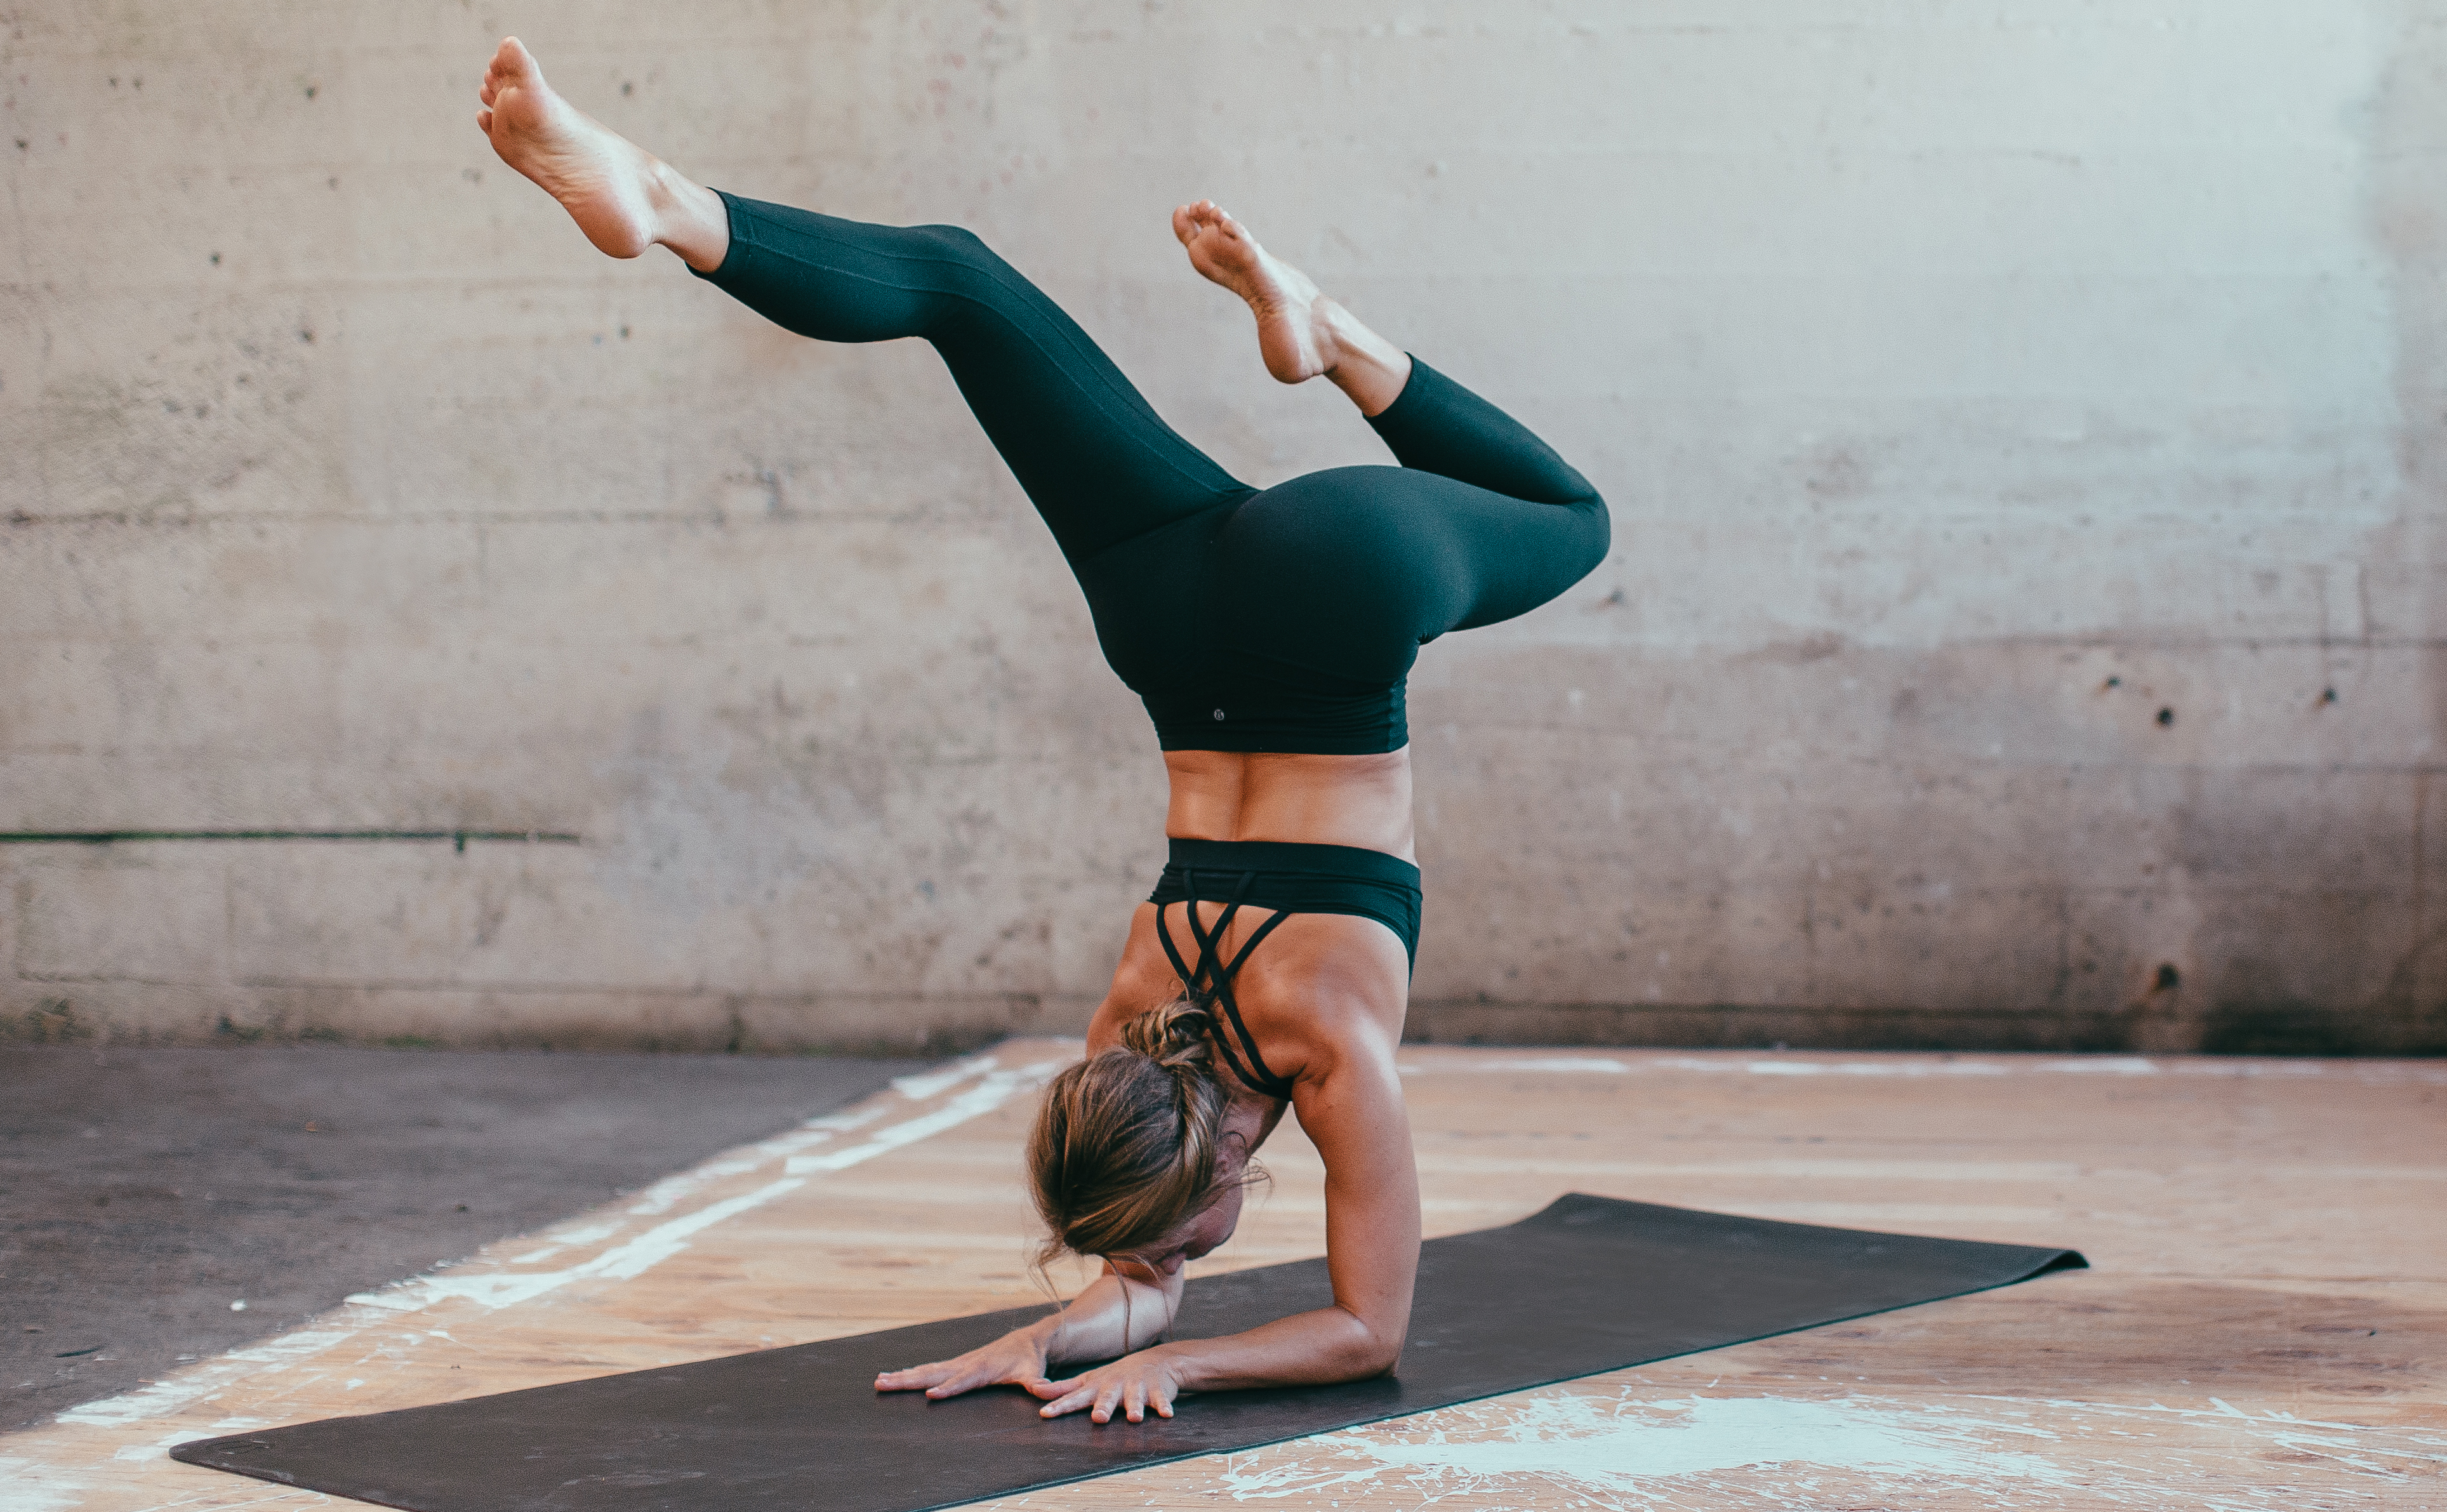 10 of the best FREE online workouts you can do at home (and still feel like you’ve kicked some butt for the day!) Click through for the details. | glitterinc.com | @glitterinc